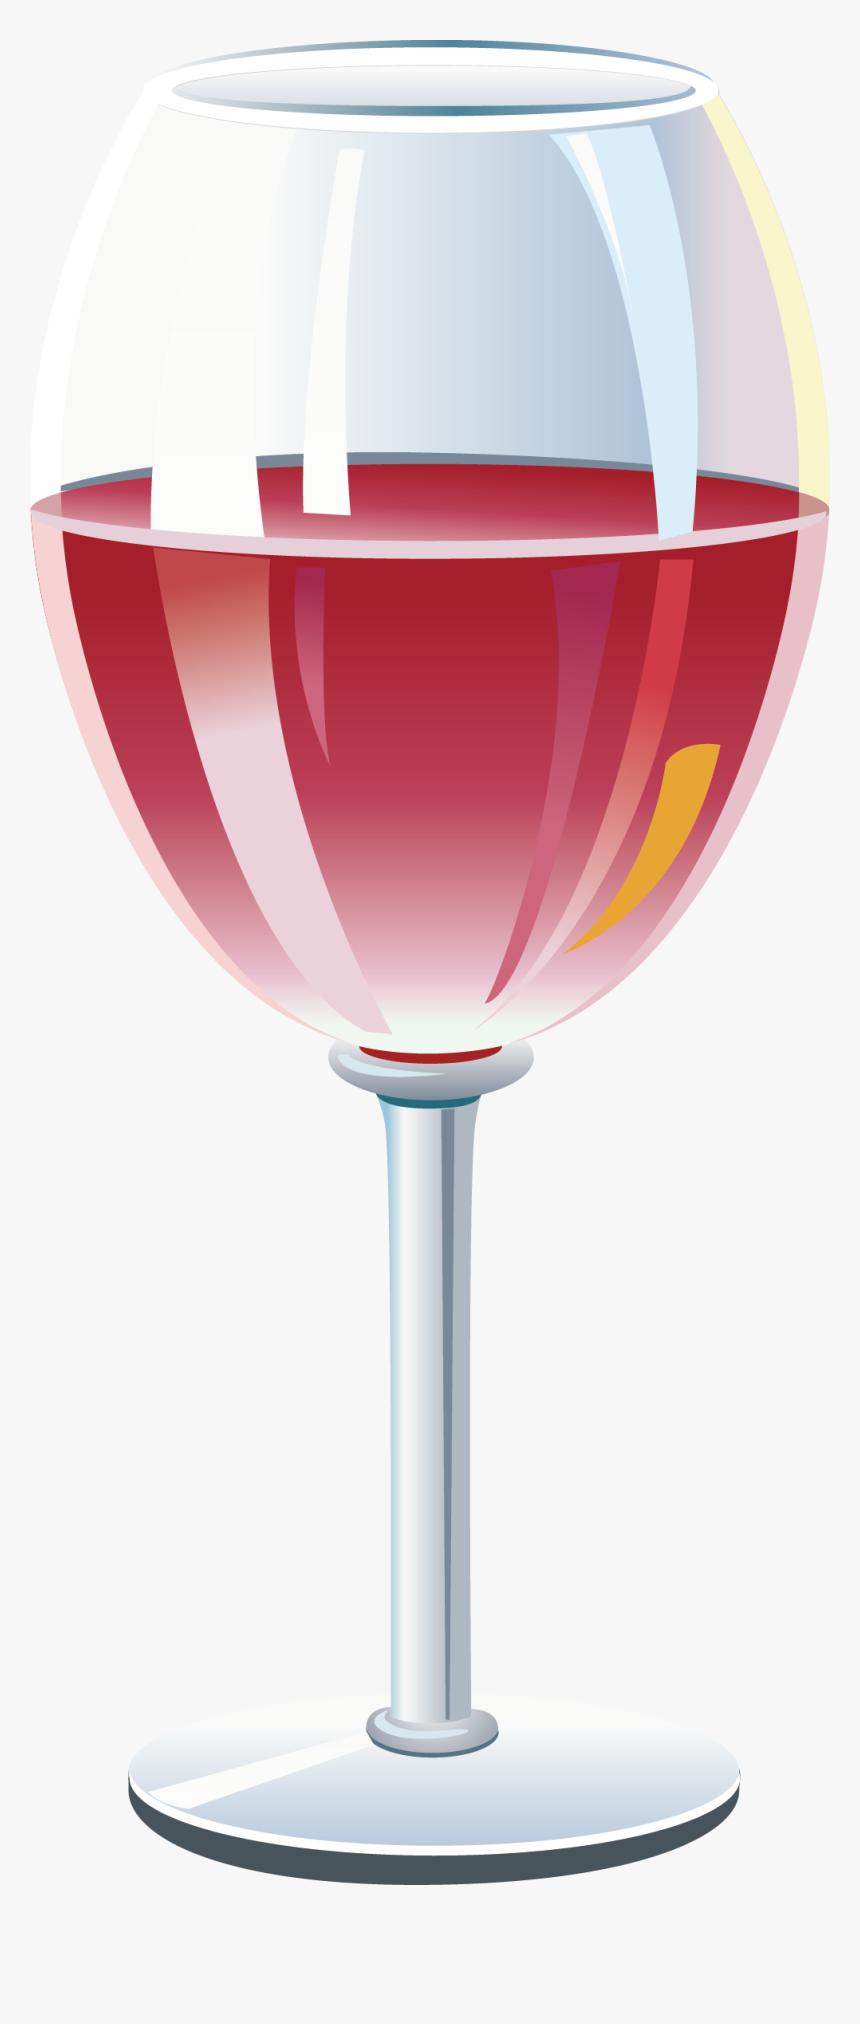 Wine Glass PNG Transparent Images Free Download, Vector Files